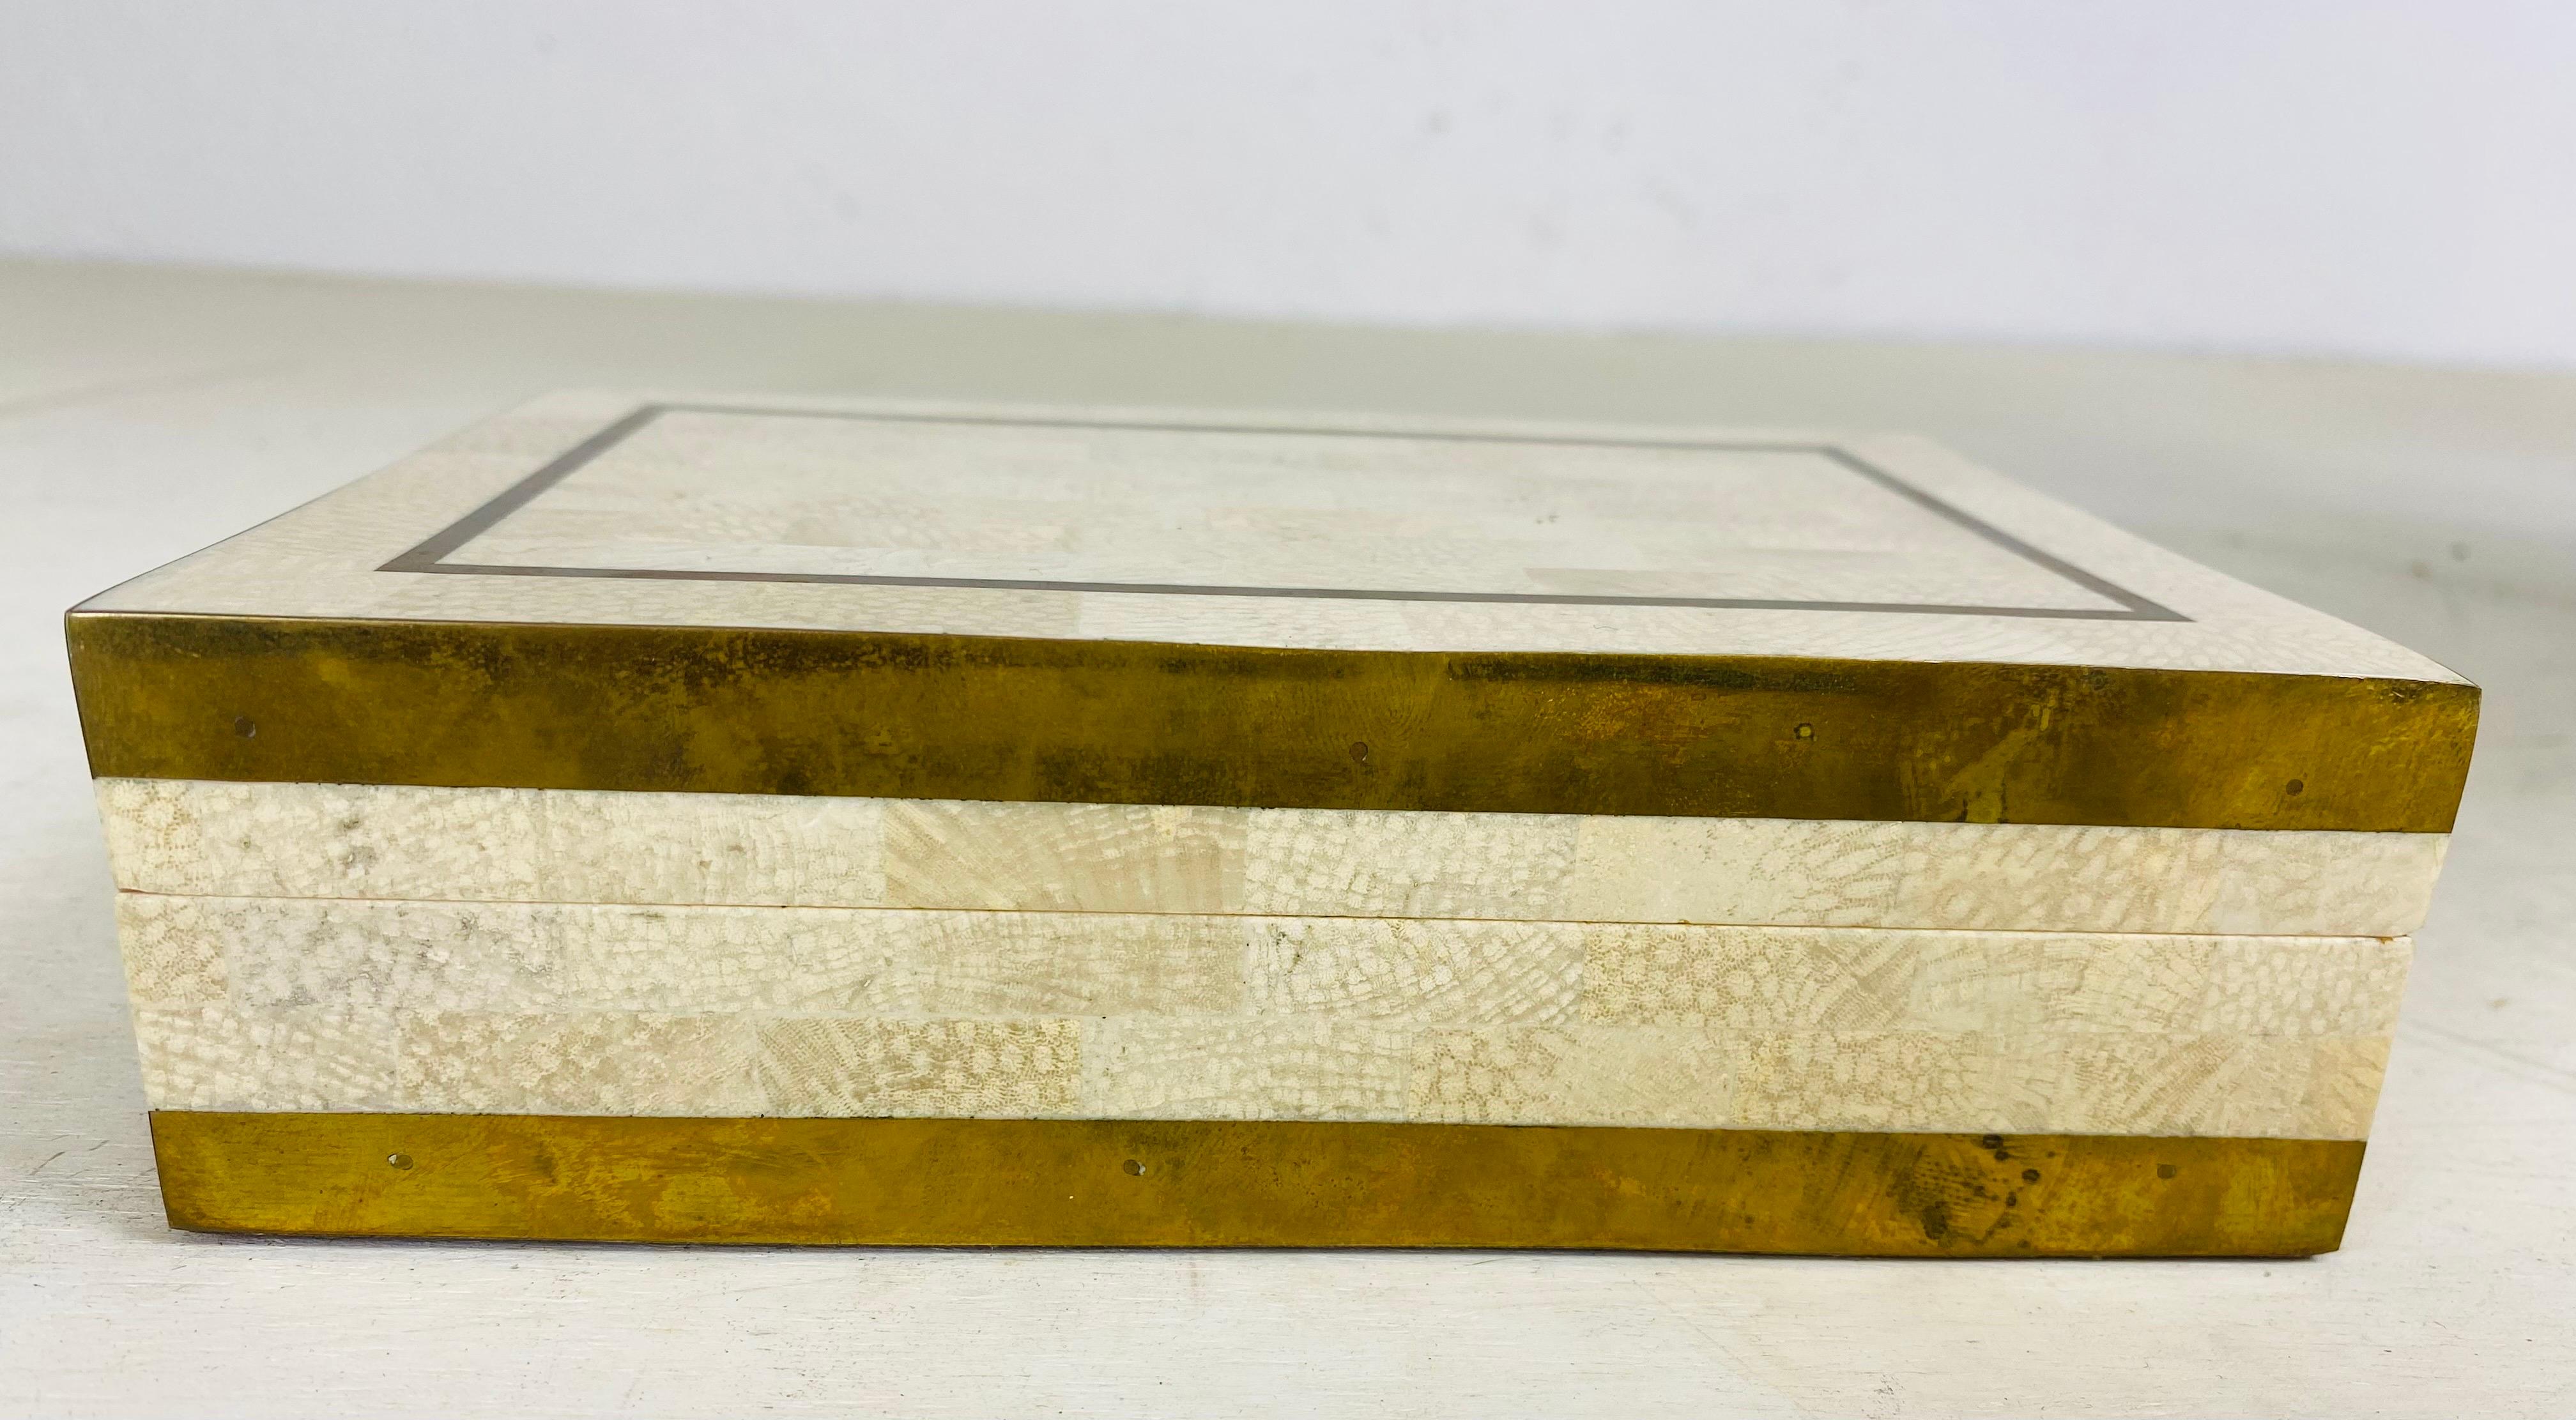 This is a handmade box by Maitland smith. This box is tessellated polish coral with brass trim. This box has a polished teak interior and has its original Maitland Smith tag on the other side.